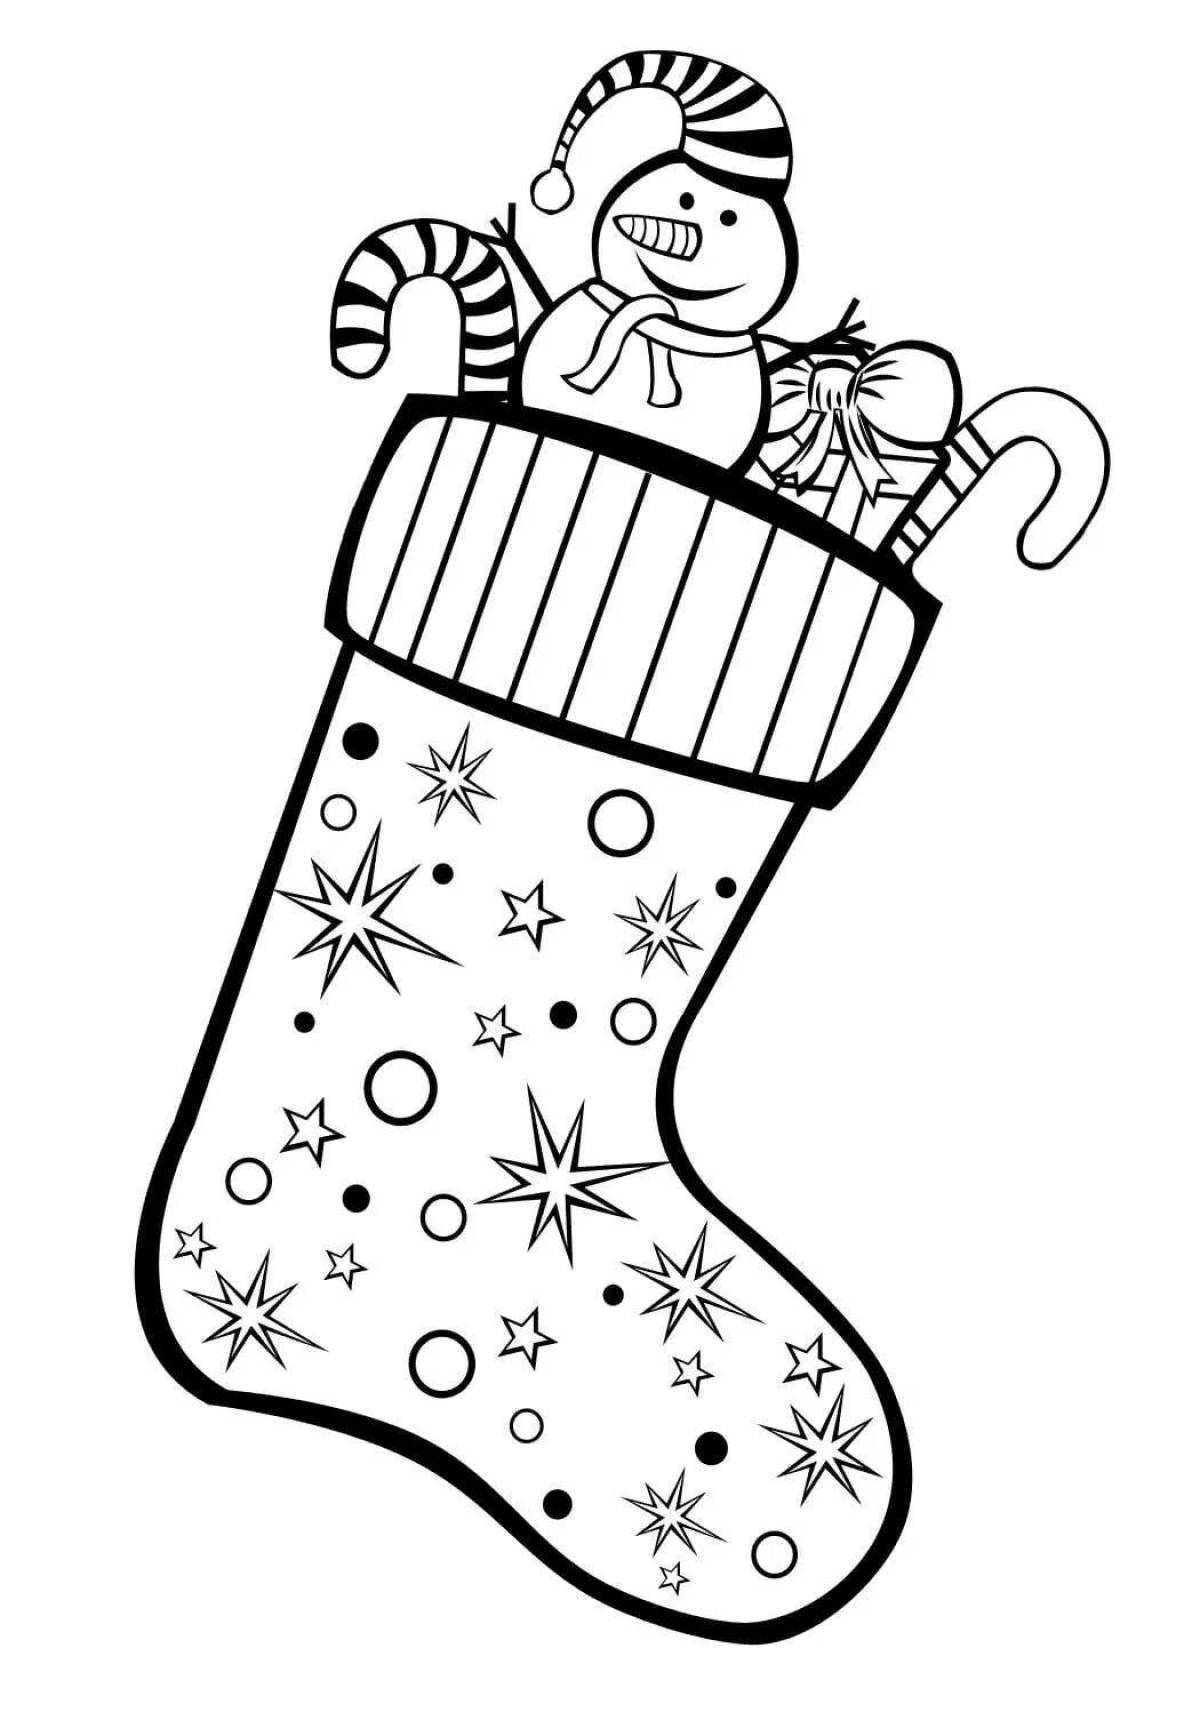 Exquisite Christmas boot coloring